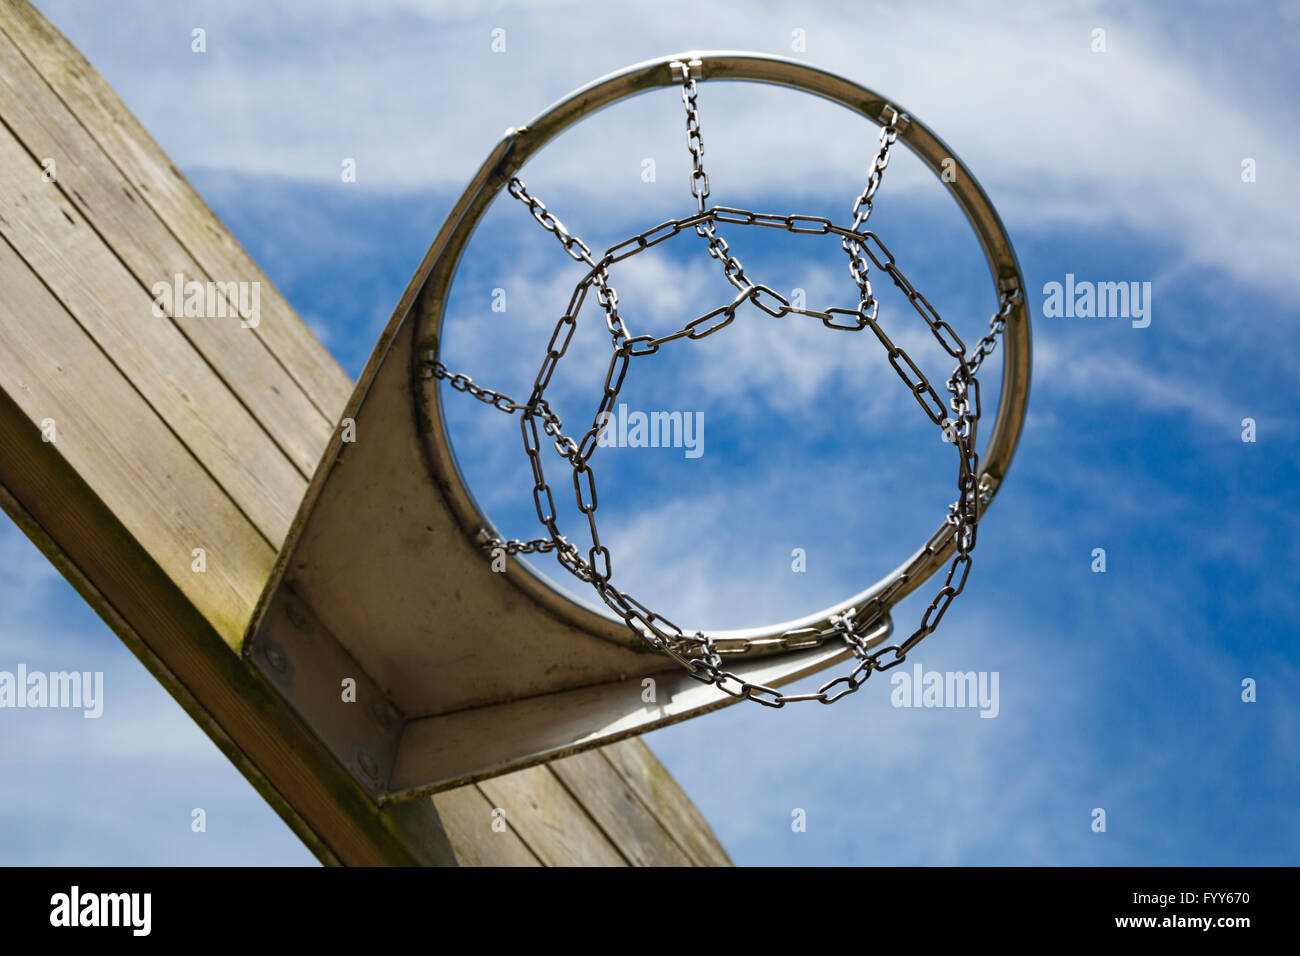 Looking up into basketball or netball hoop Stock Photo